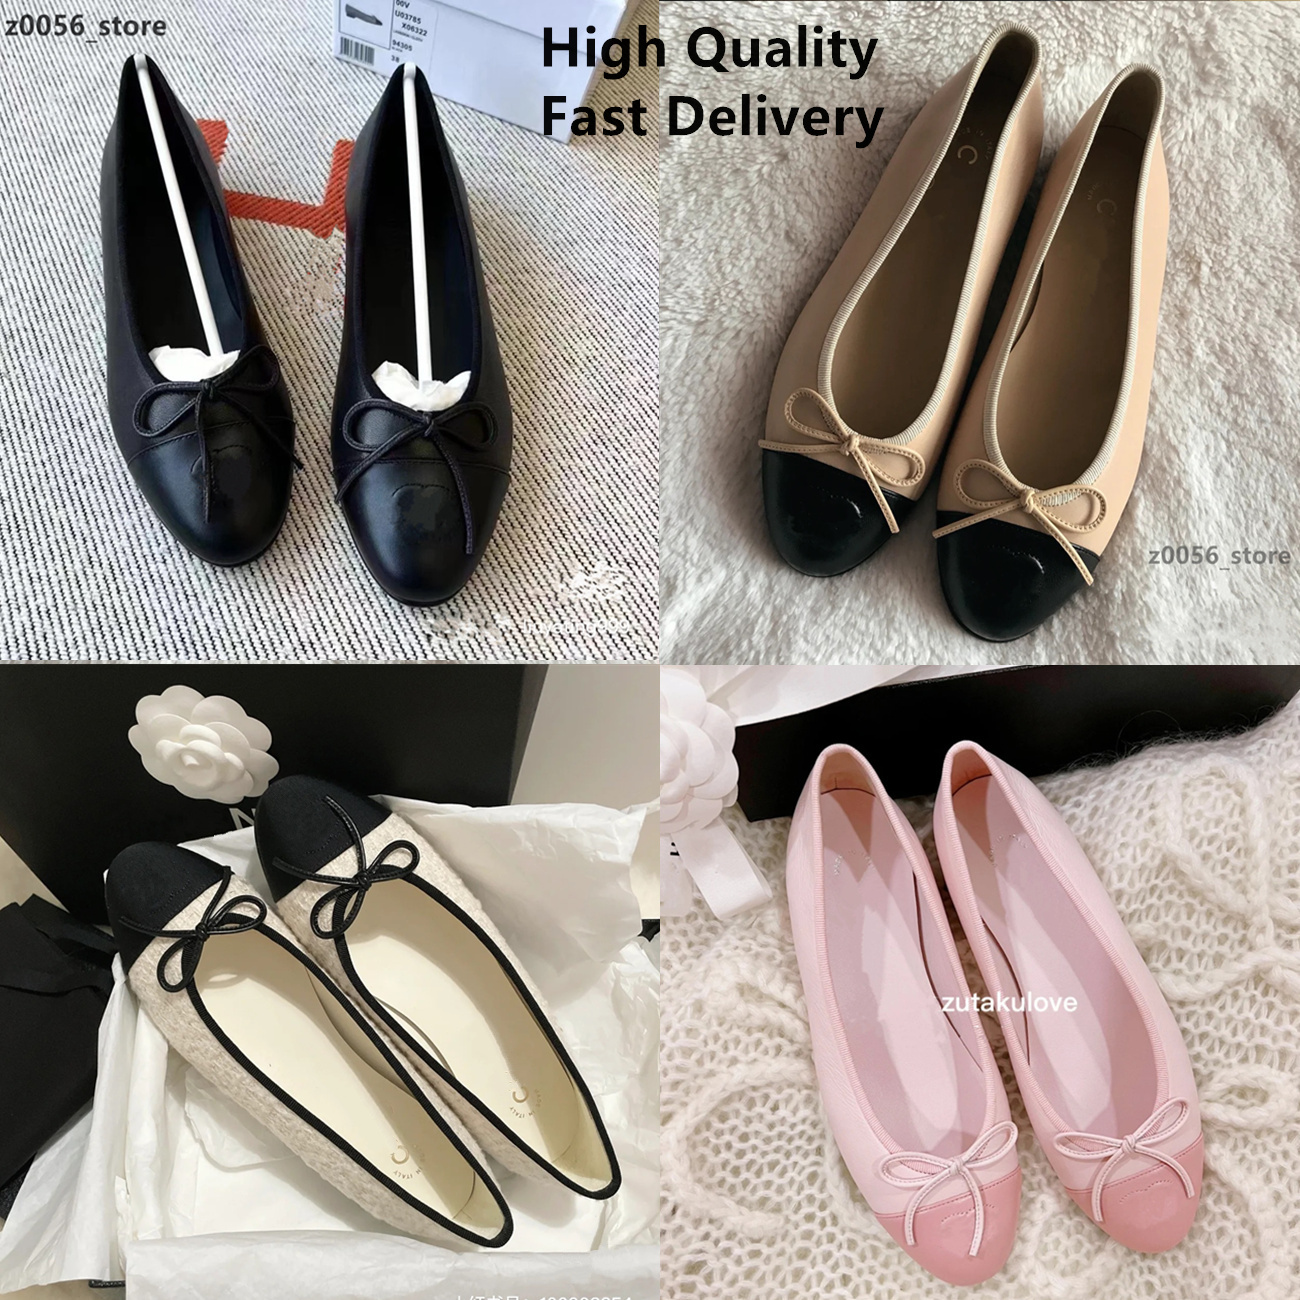 

Paris Luxury designer Black Ballet Flats Shoes Women brands Quilted Genuine Leather Slip on Ballerina Round Toe Ladies Dress Shoes channel Zapatos De Mujer, C20 high quality